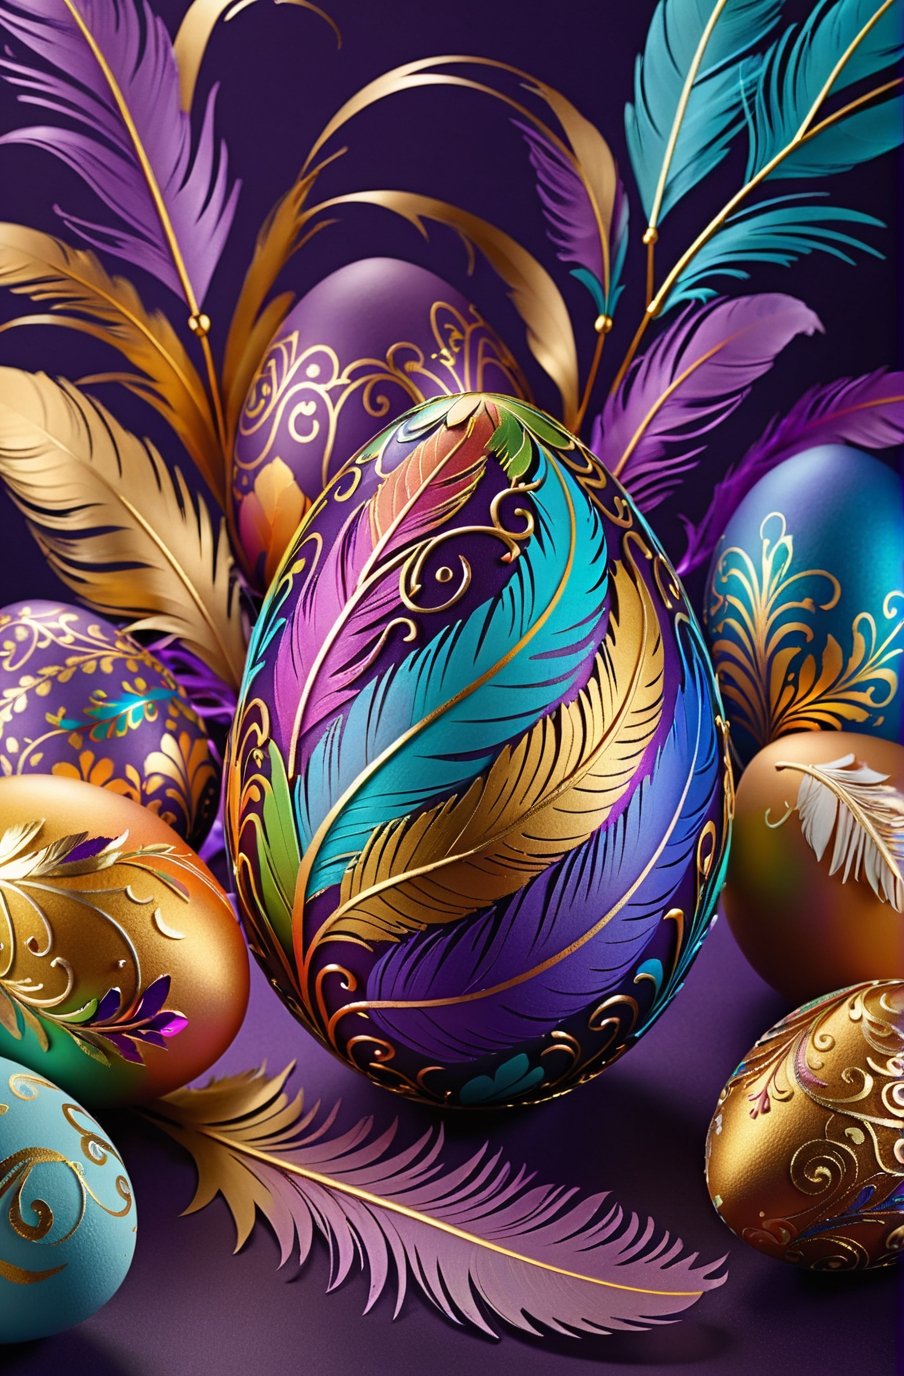 Easter eggs designed with arabesques and swirls using a harmonious mix of rainbow colors.
Golden branches and feathers cover the egg from the bottom as if to protect it.
The egg shines even brighter due to the intense lighting that illuminates the egg on a dark purple background.

Ultra-clear, Ultra-detailed, ultra-realistic, ultra-close up